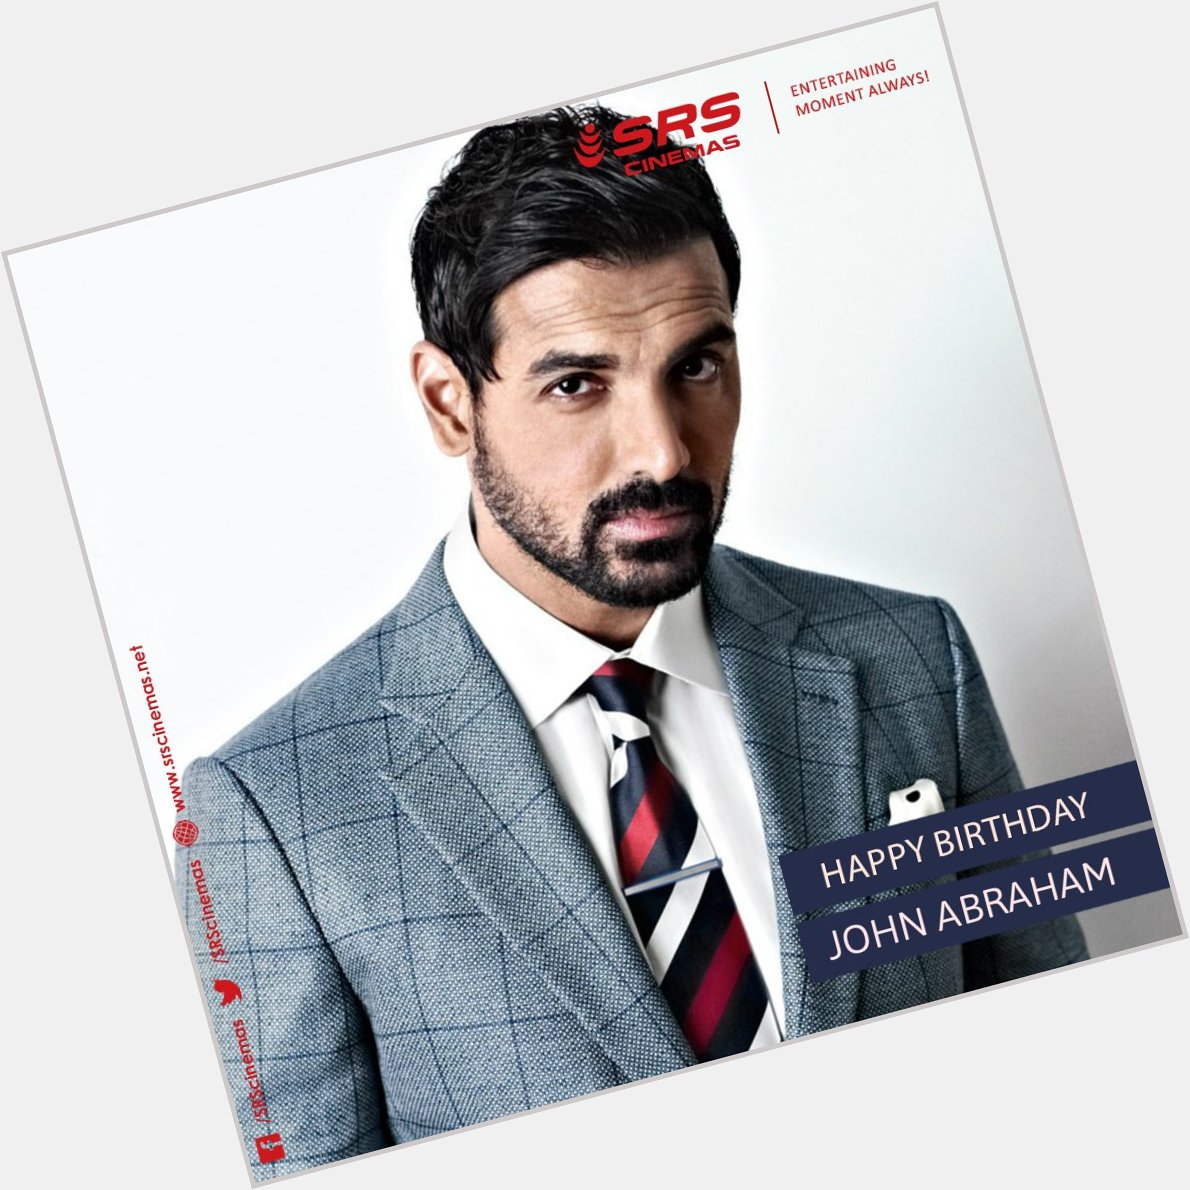 Very happy birthday to the hottest and fittest actor, John Abraham! 